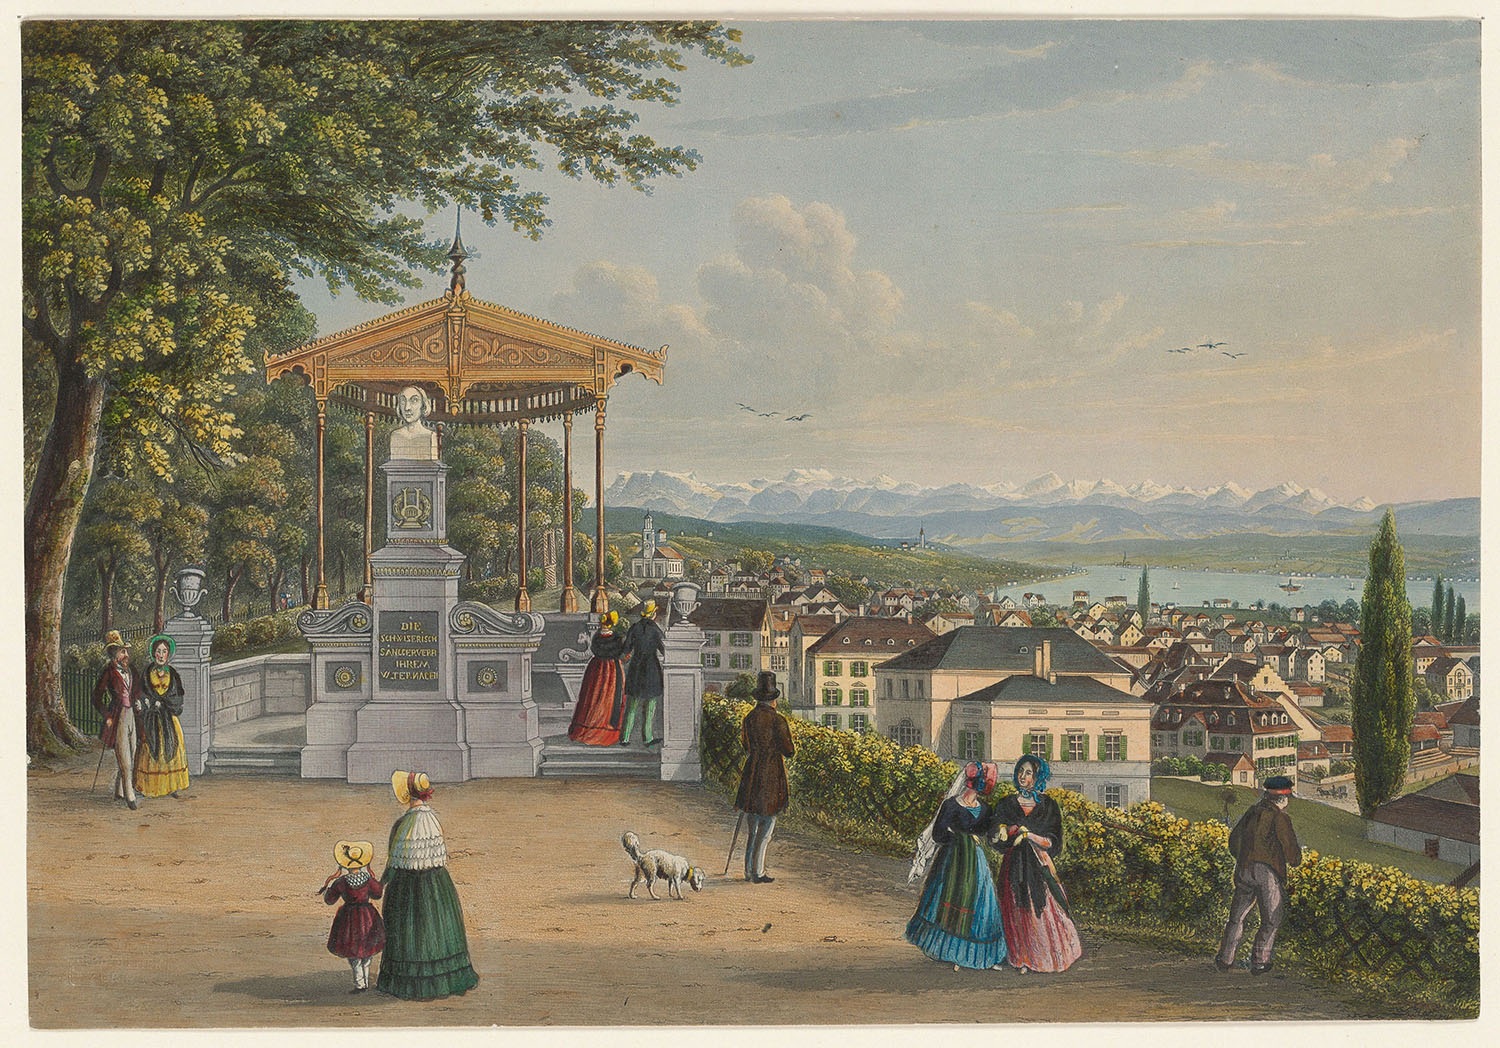 The Nägeli memorial on the Hohe Promenade, between 1875 and 1889. The memorial was erected by the Schweizerische Sängerverein [Swiss Singers’ Association] to commemorate Nägeli’s services to the culture of singing. It has been moved several times and is now located behind the Kantonsschule Hohe Promenade. (Image: Heinrich Siegfried/ZB Zürich)